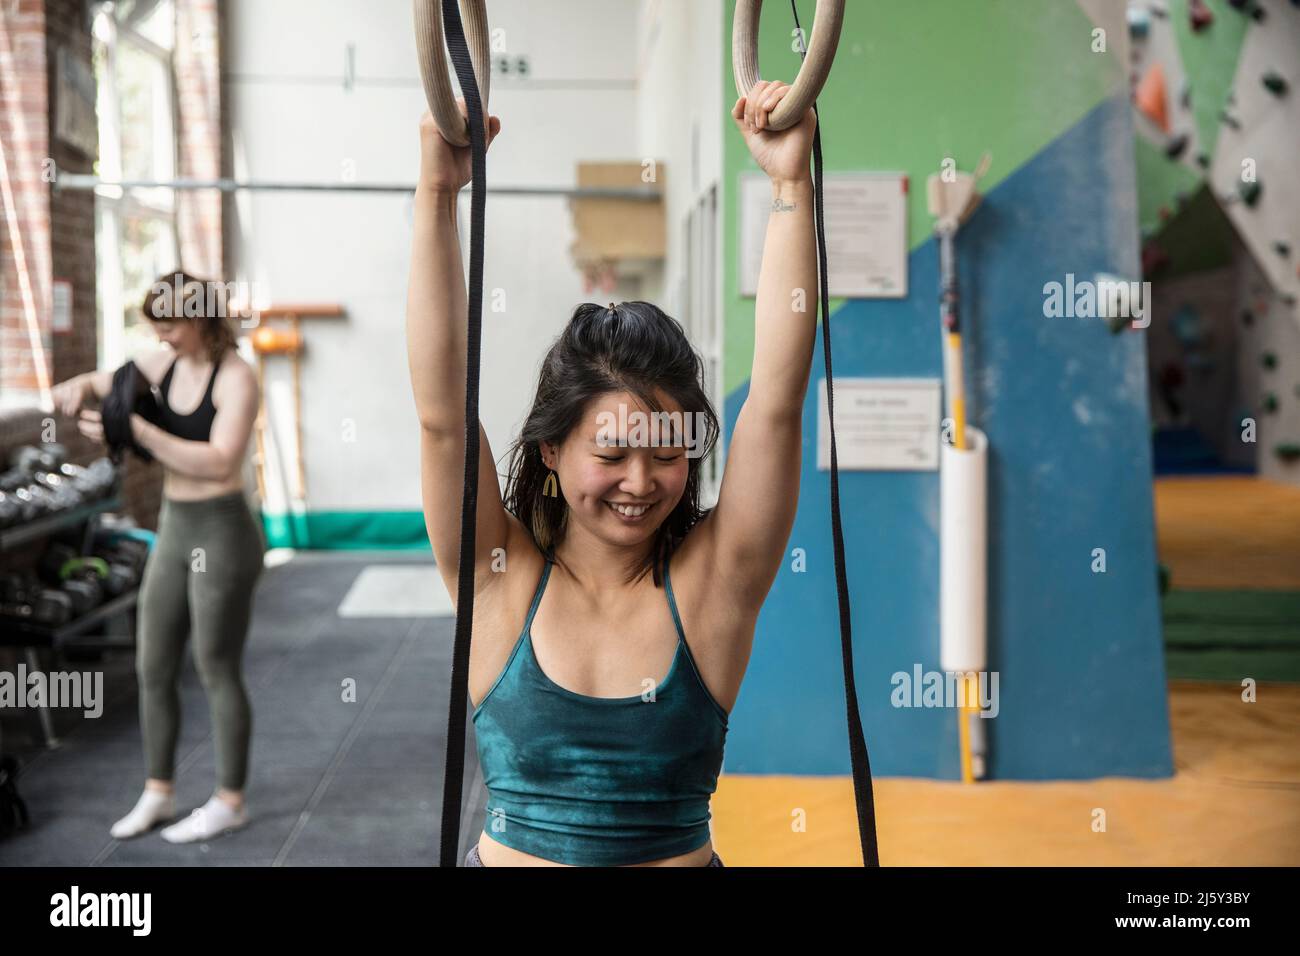 Happy woman exercising at gymnastics rings in gym Stock Photo